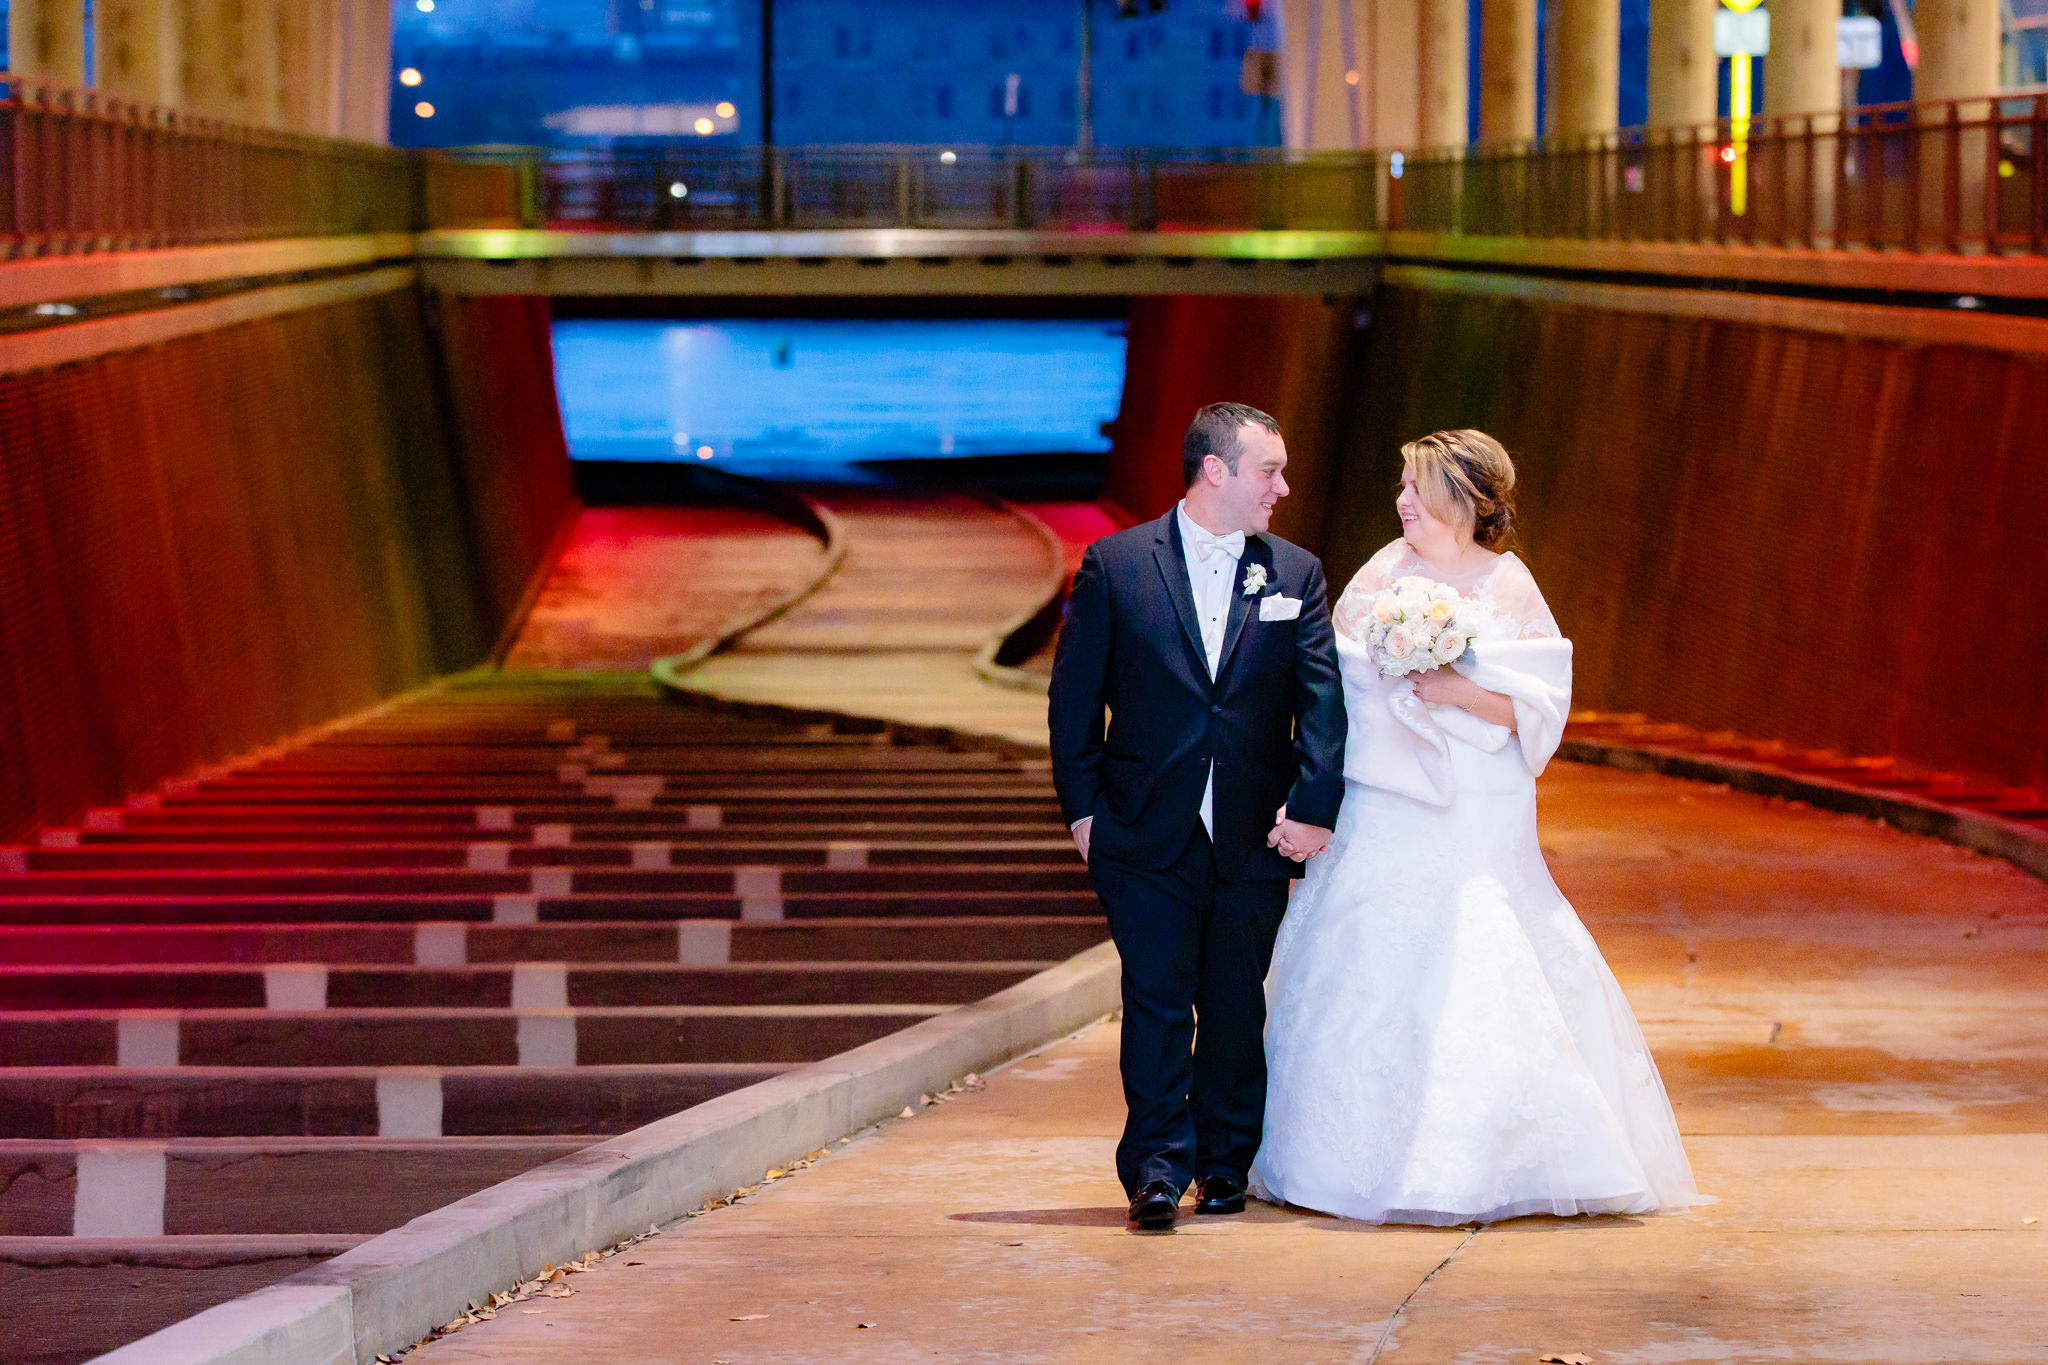 Newlyweds walk through the David L. Lawrence Convention Center walkway in Pittsburgh PA